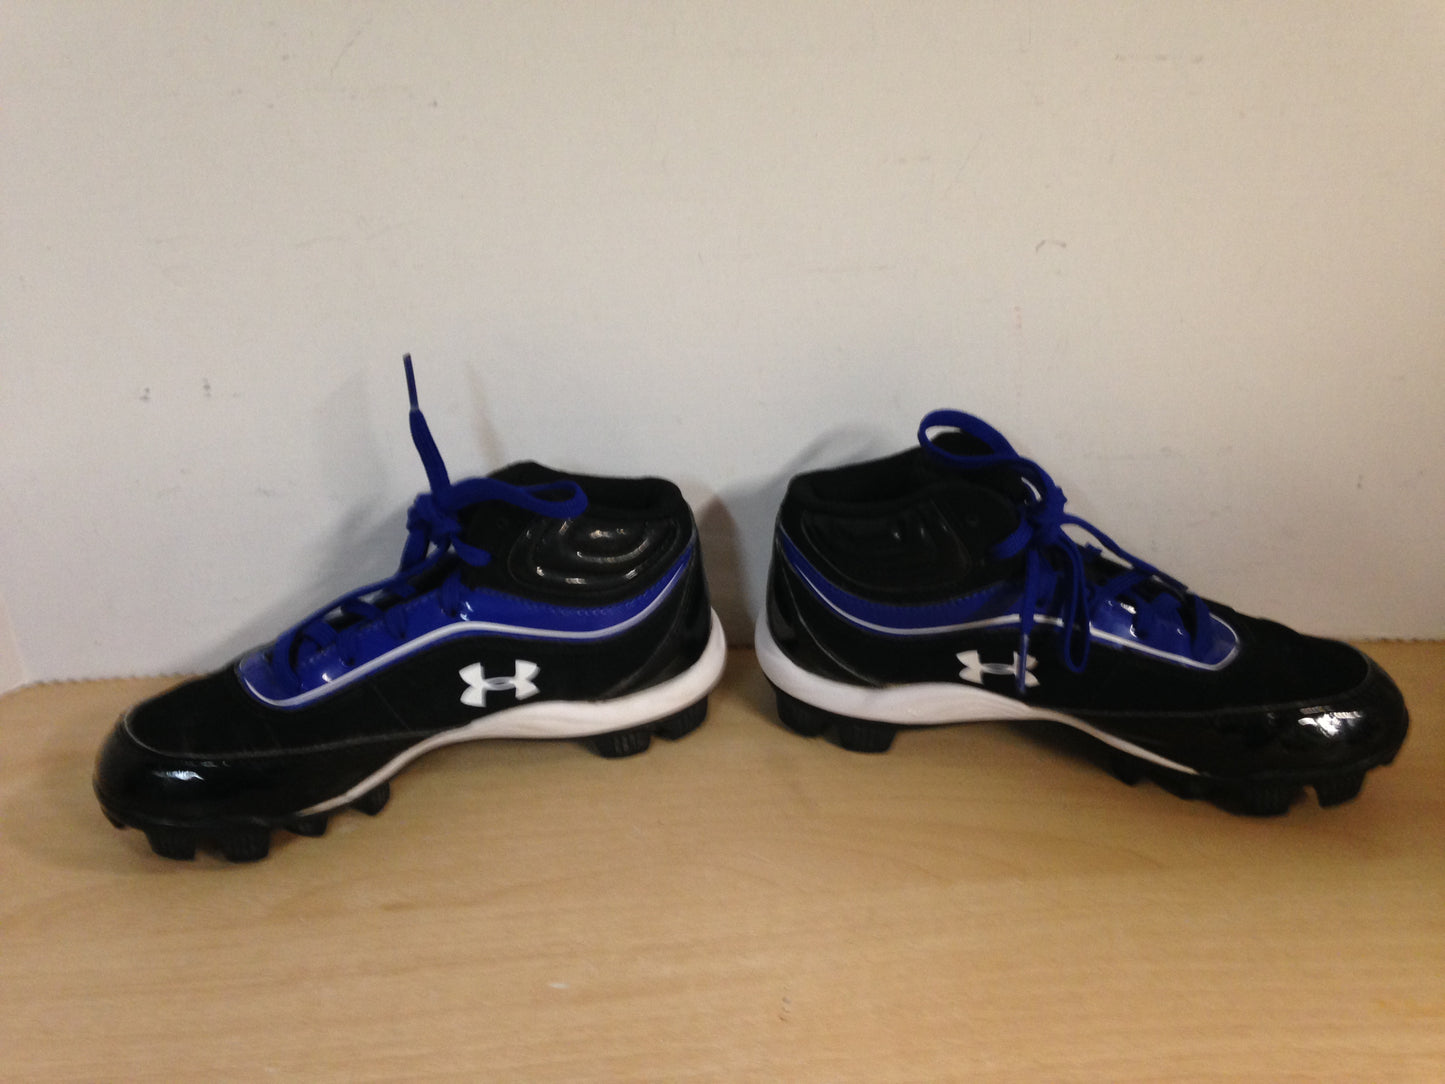 Baseball Shoes Cleats Child Size 2.5 Under Armour Blue Black